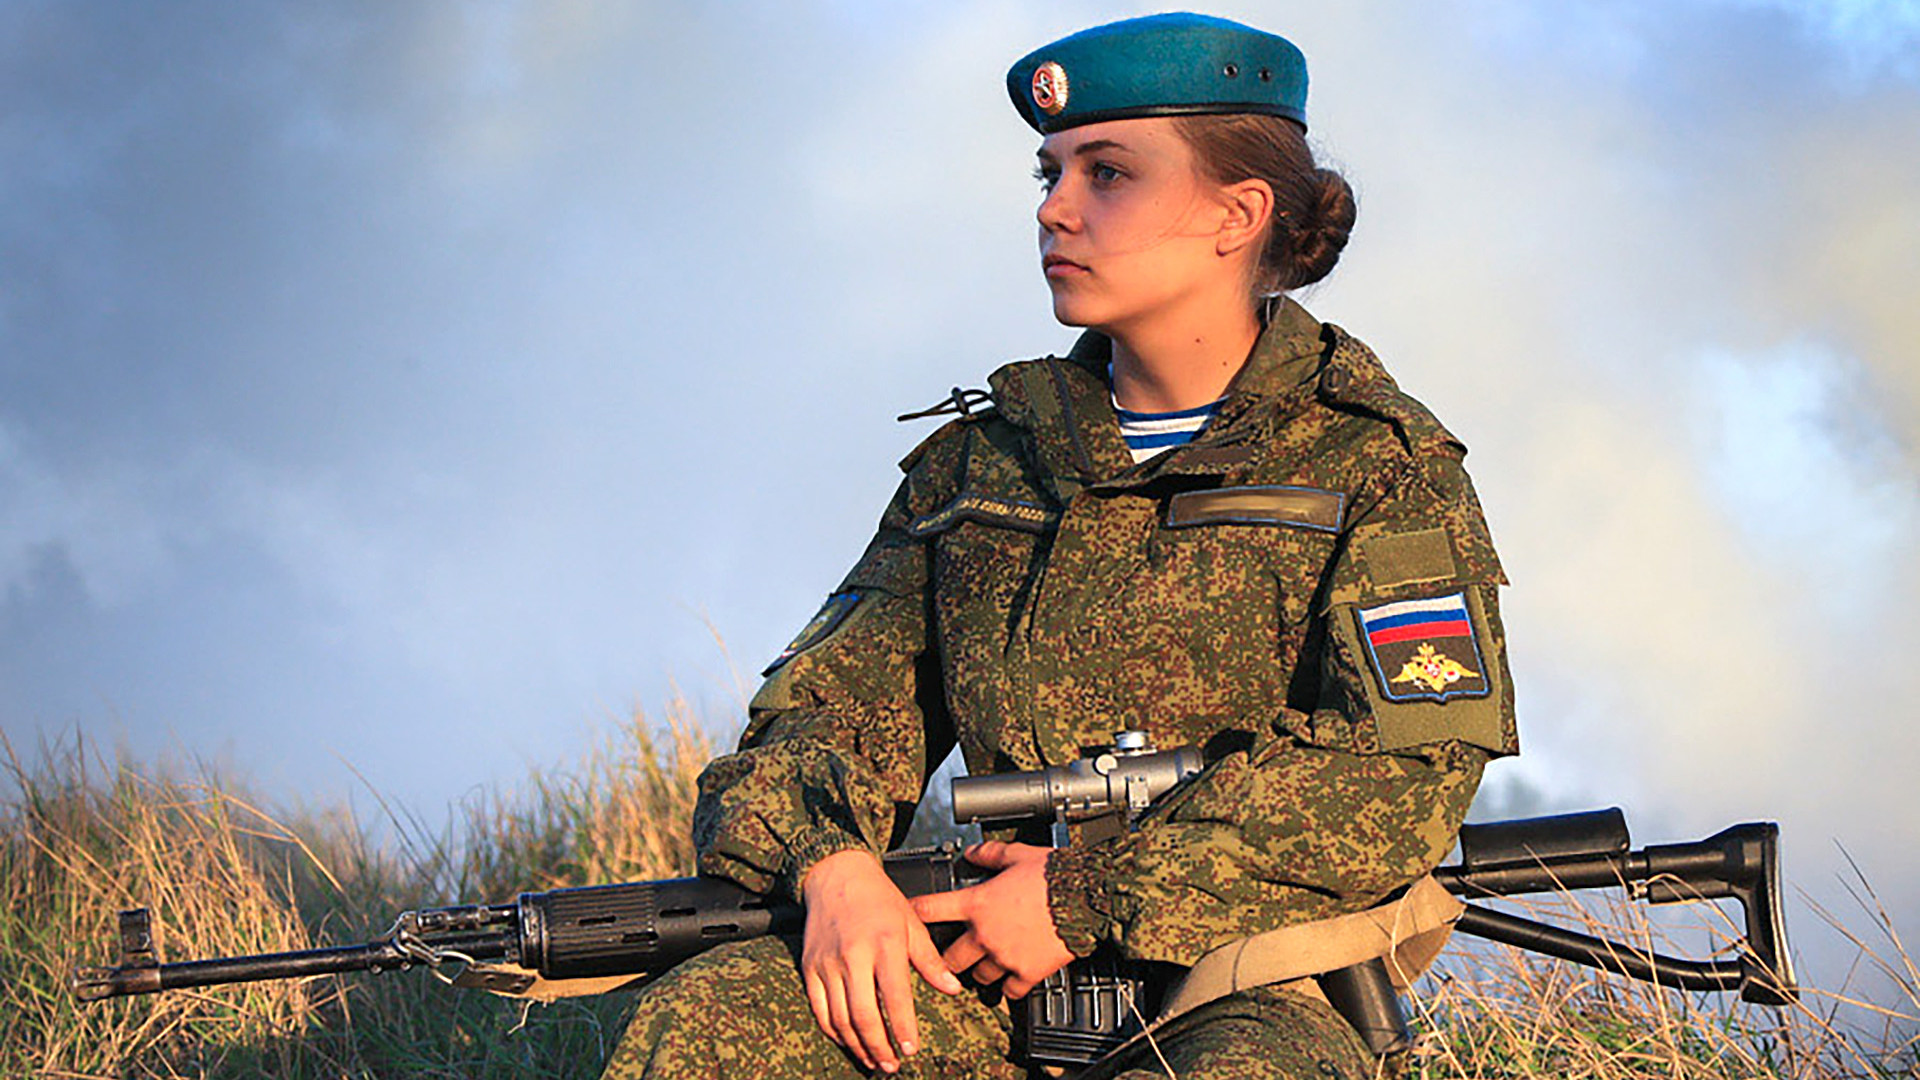 Russia's Amazon warriors: Why are women joining the country's military?